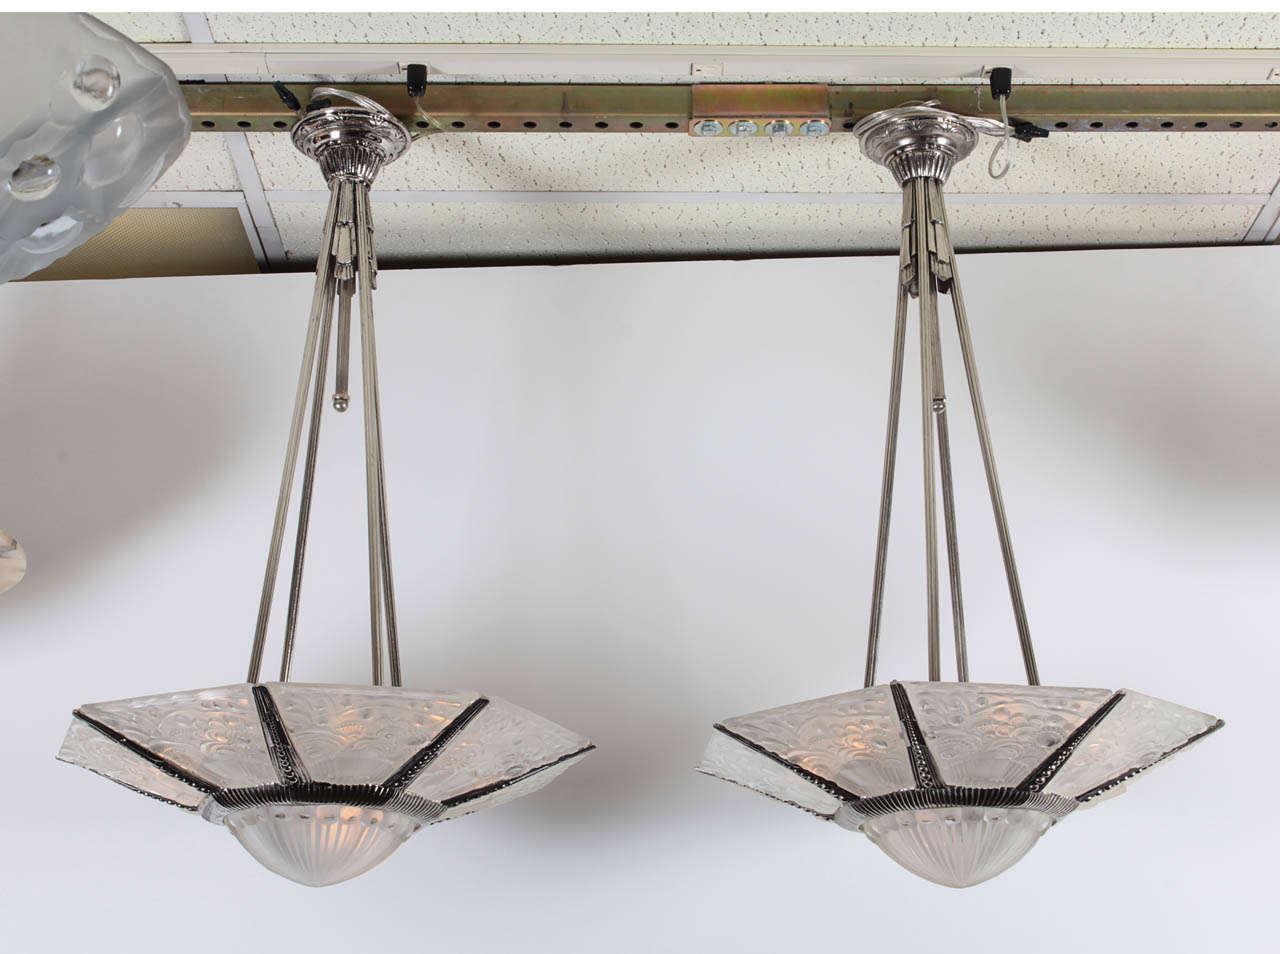 A pair of elegant French Art Deco chandeliers by Leleu comprising eight panels plus the center. A central coup in molded, frosted art glass decorated in radiating stripes with ball border is surrounded by eight trapazoid shaped frosted art glass